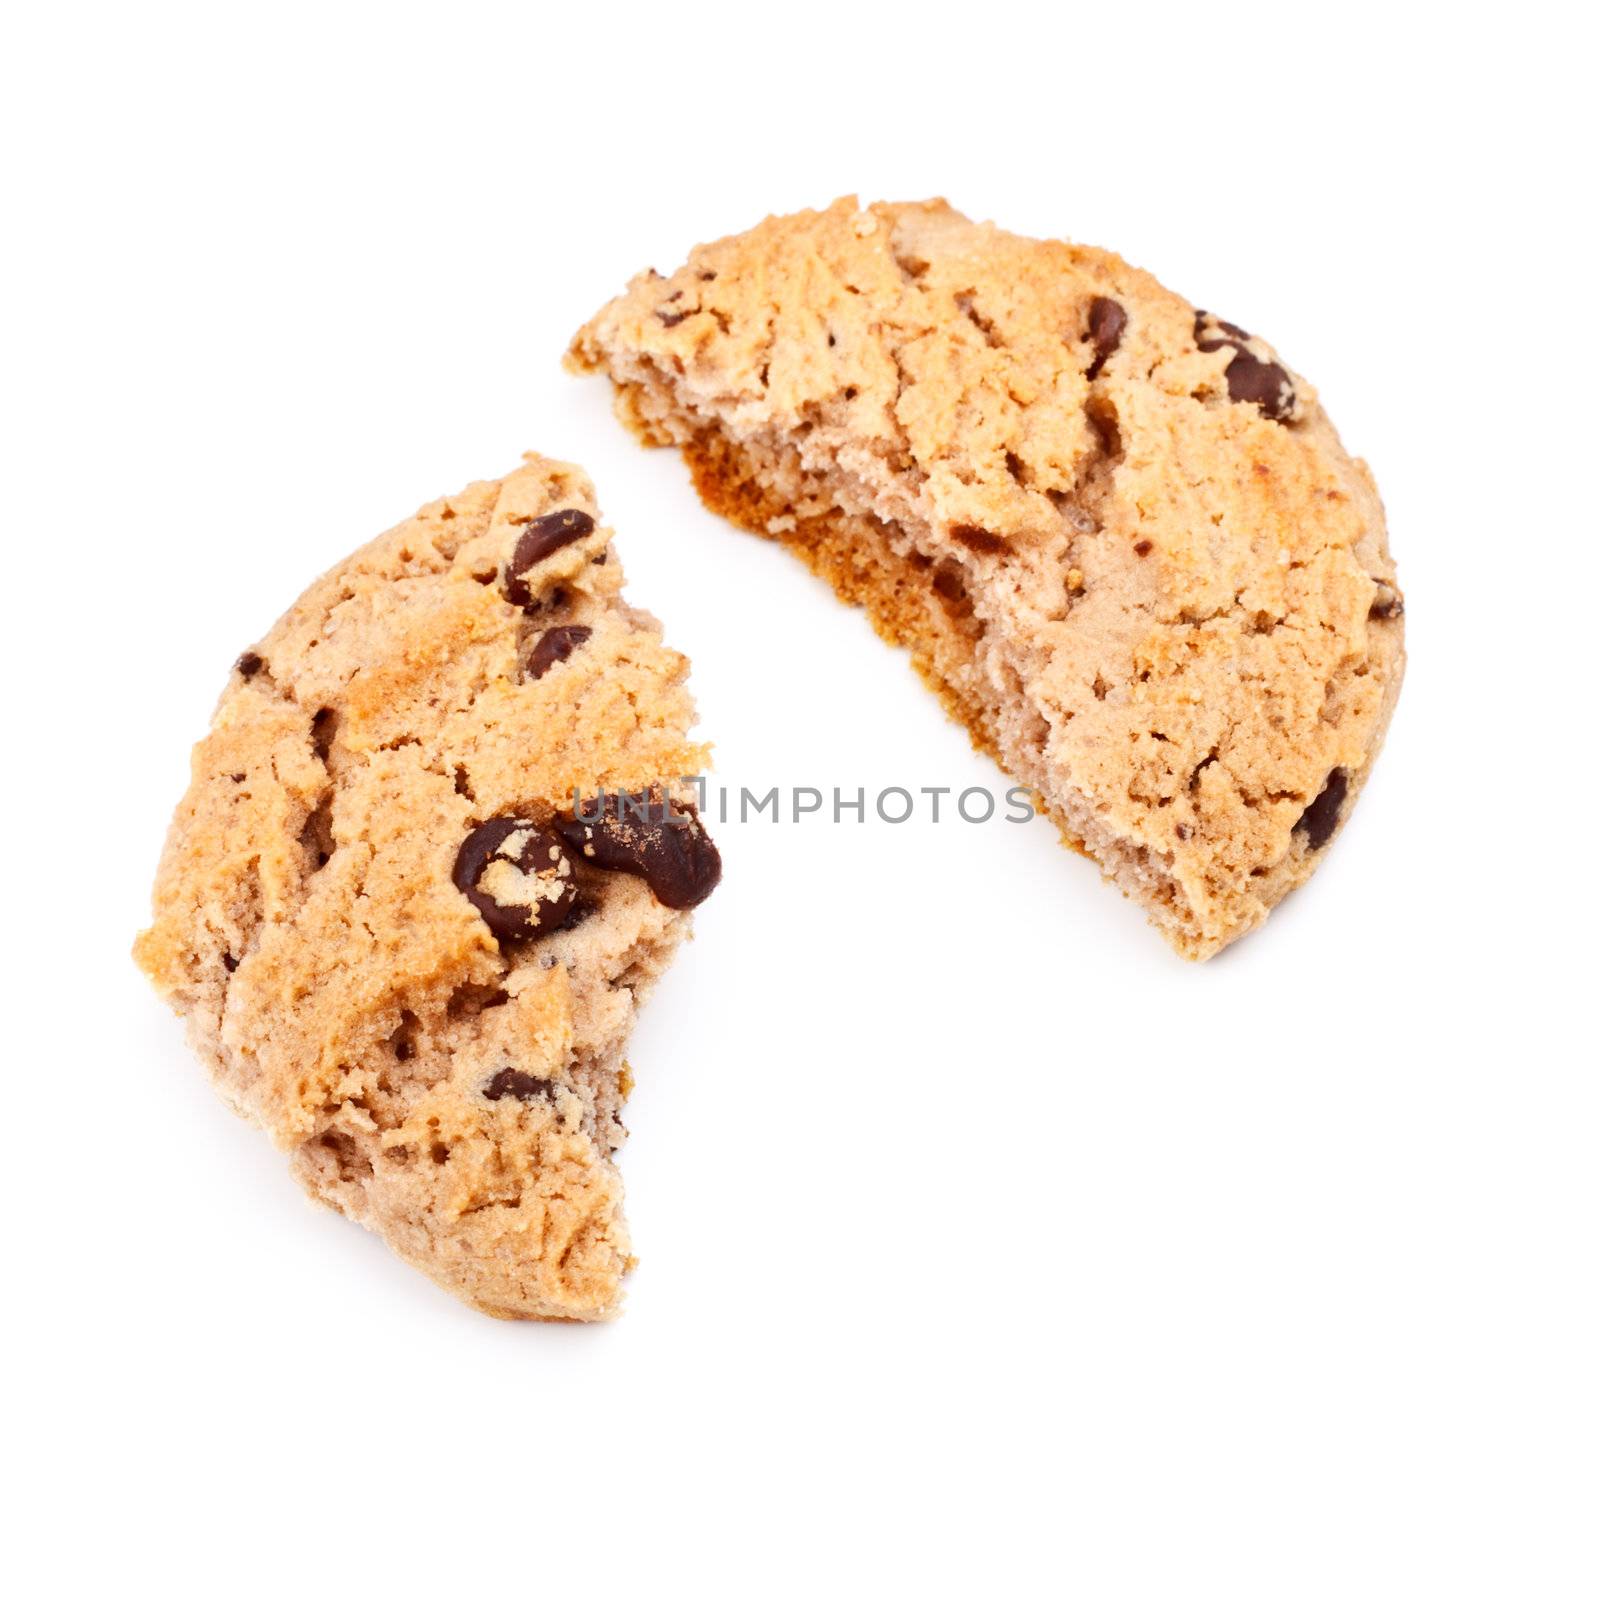 Oatmeal Chocolate Chip Cookie by petr_malyshev